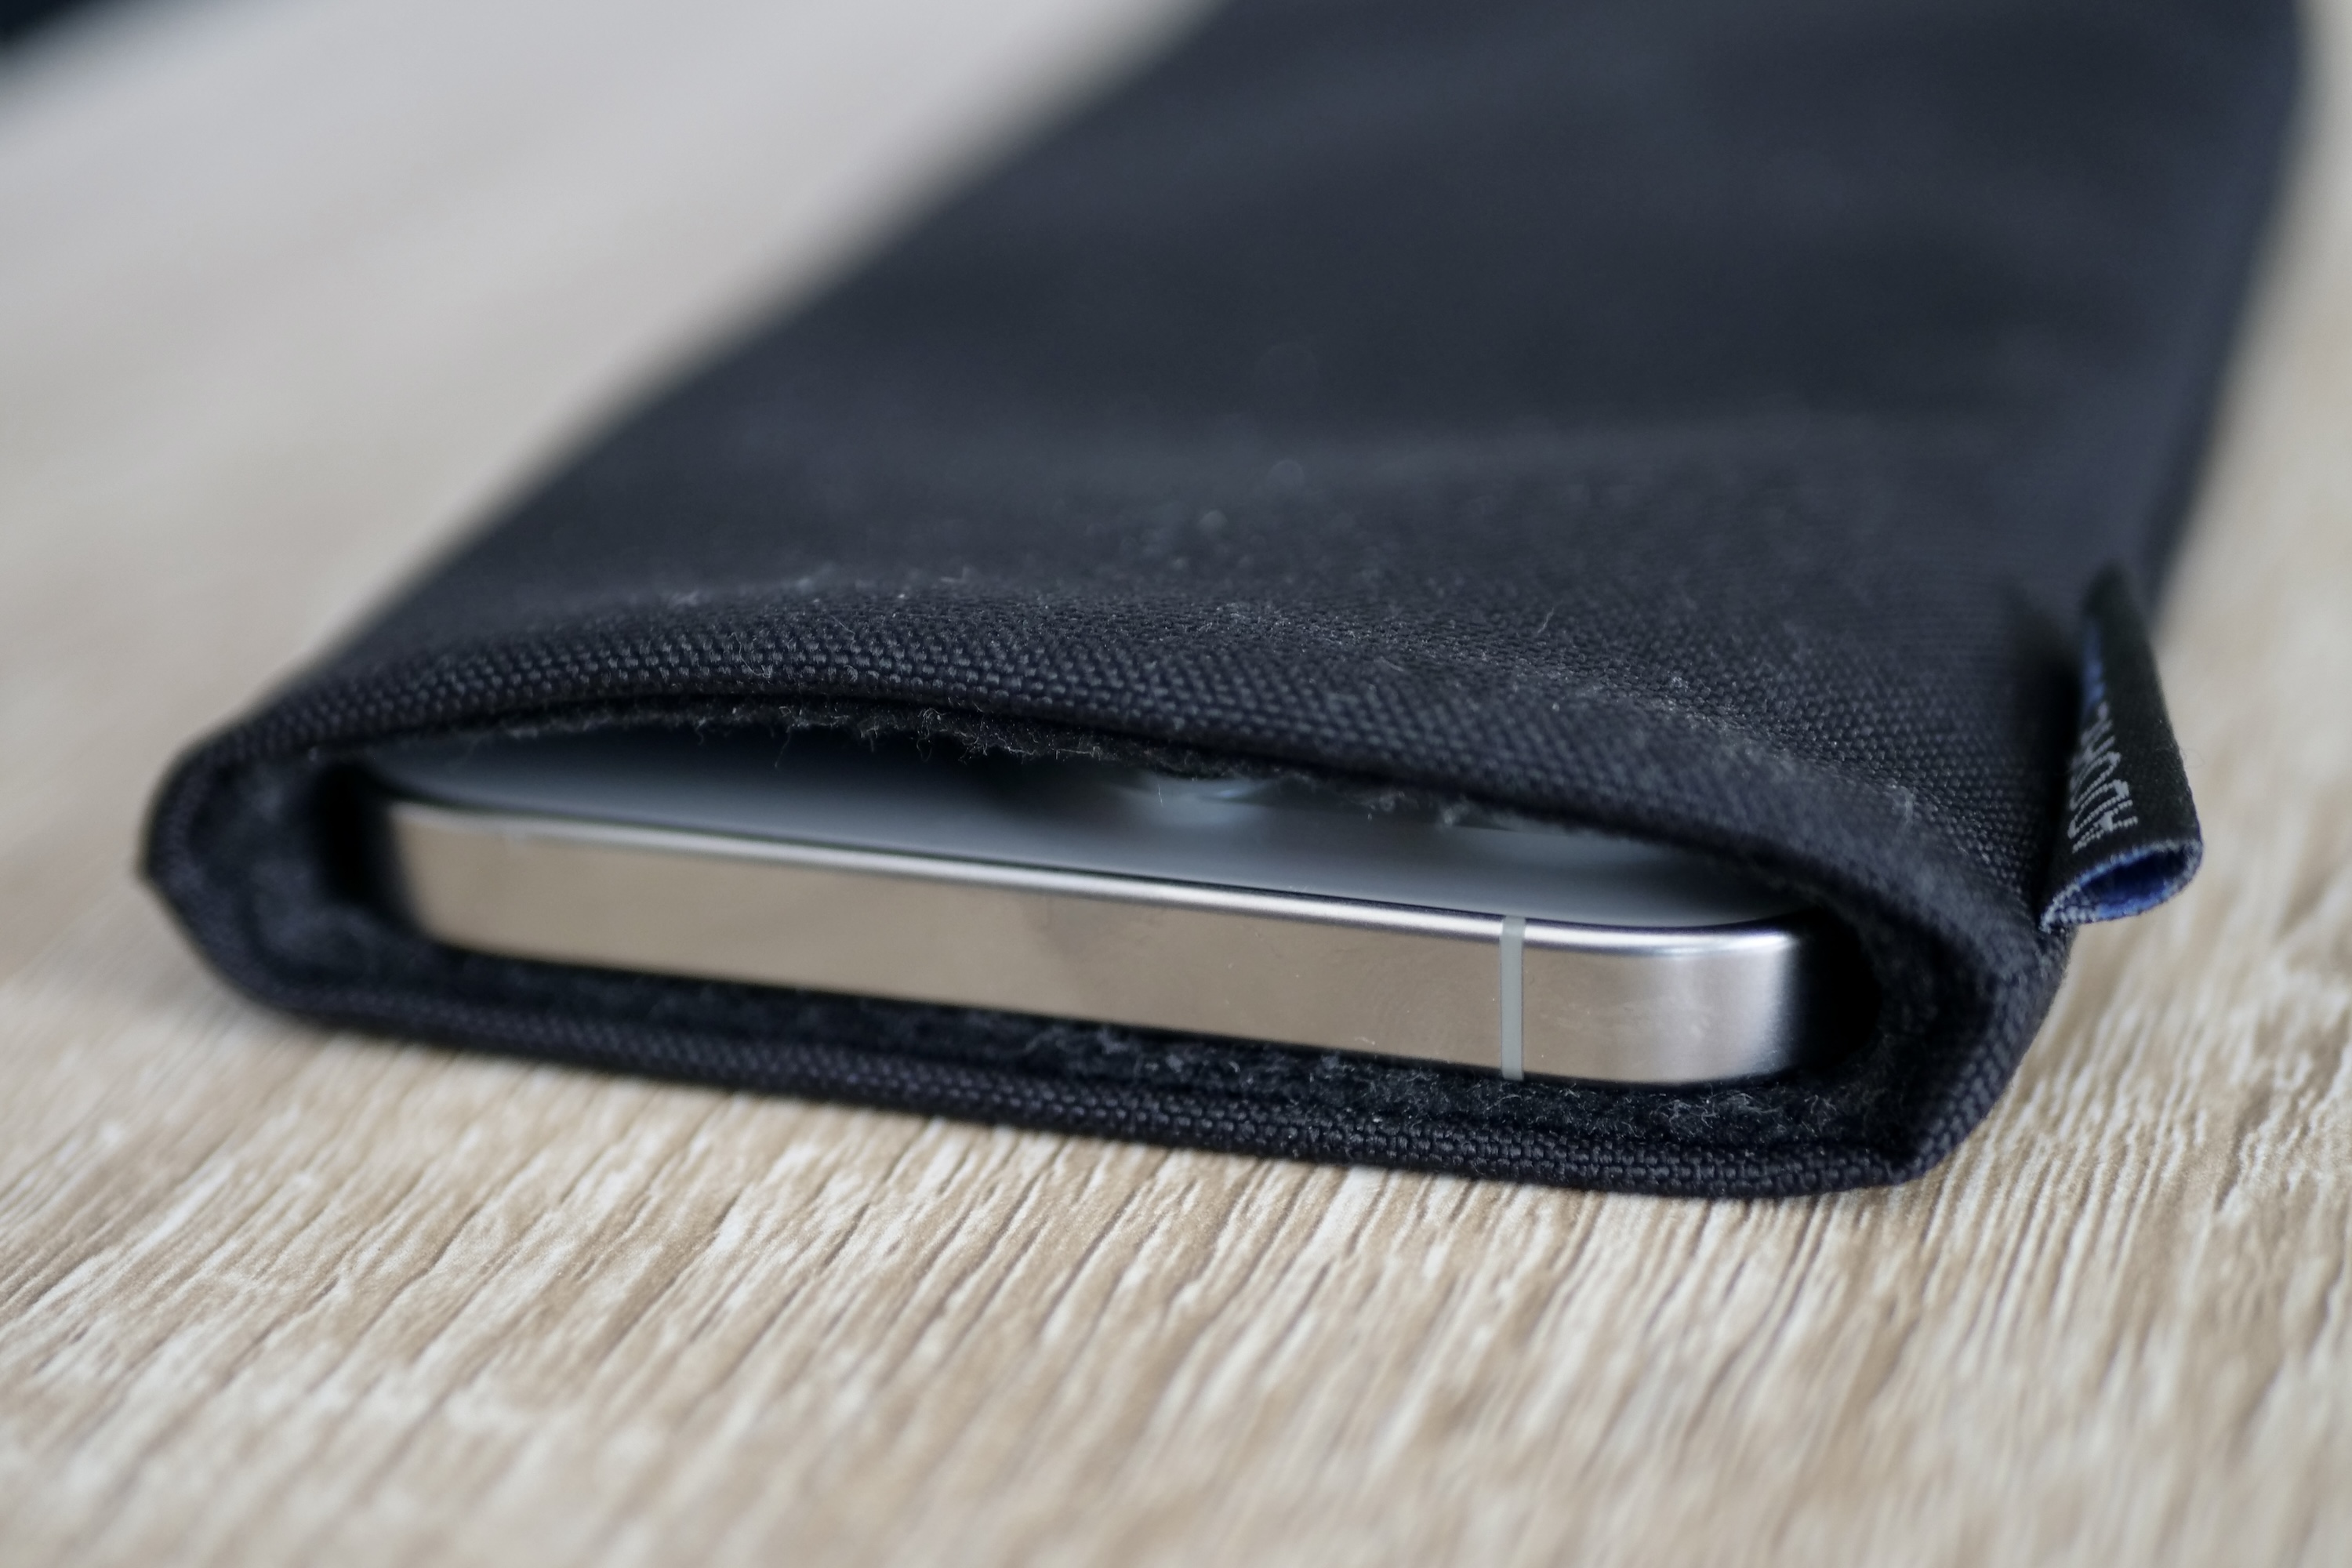 The iPhone 15 Pro Max inside the Adore June pouch.